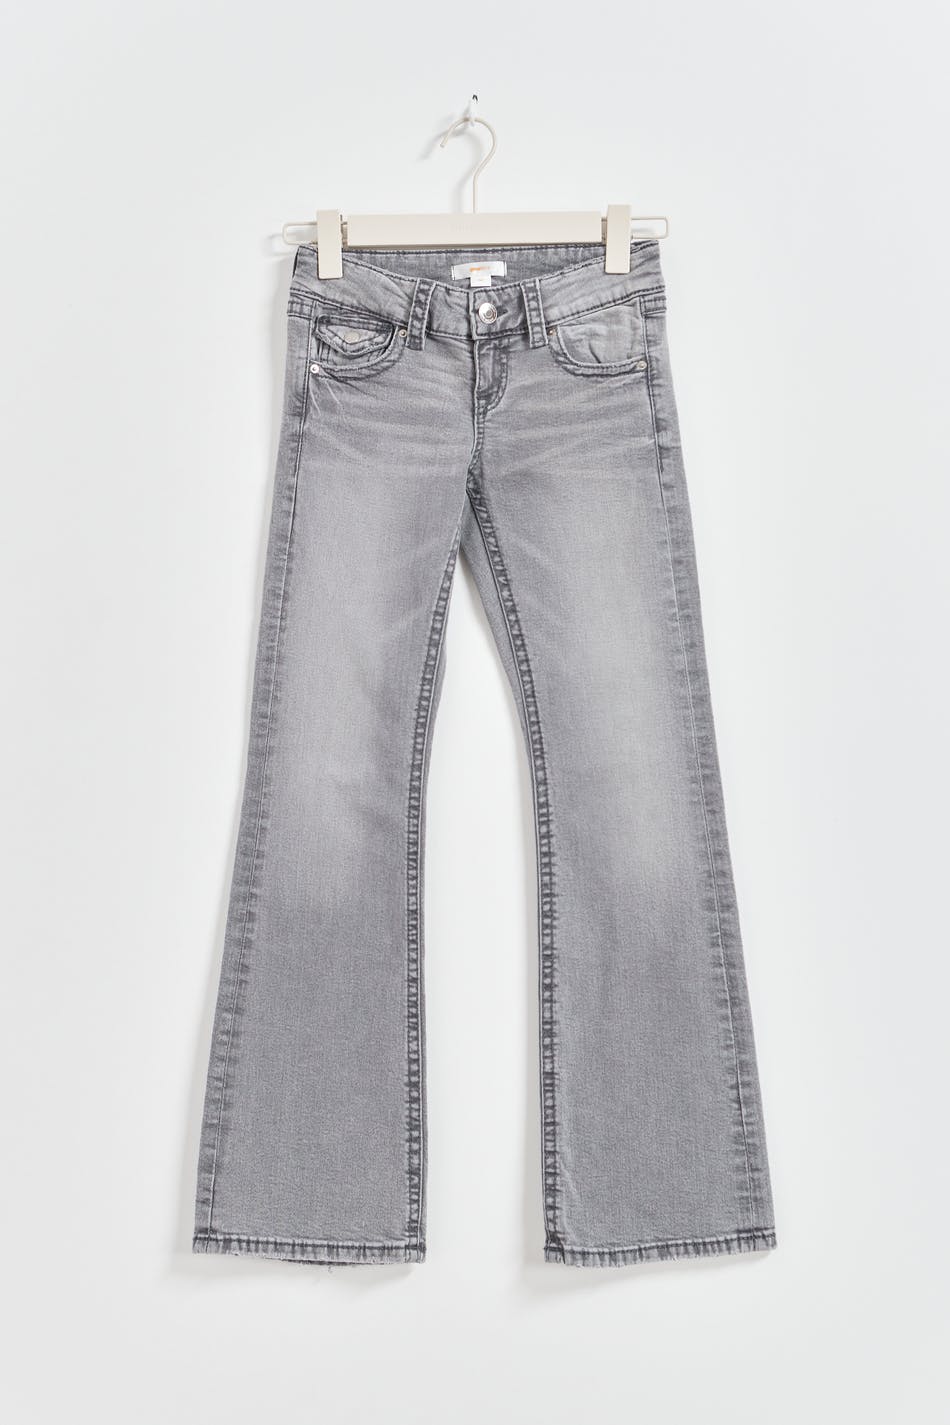 Gina Tricot - Chunky flare tall jeans - wide jeans - Grey - 146 - Female